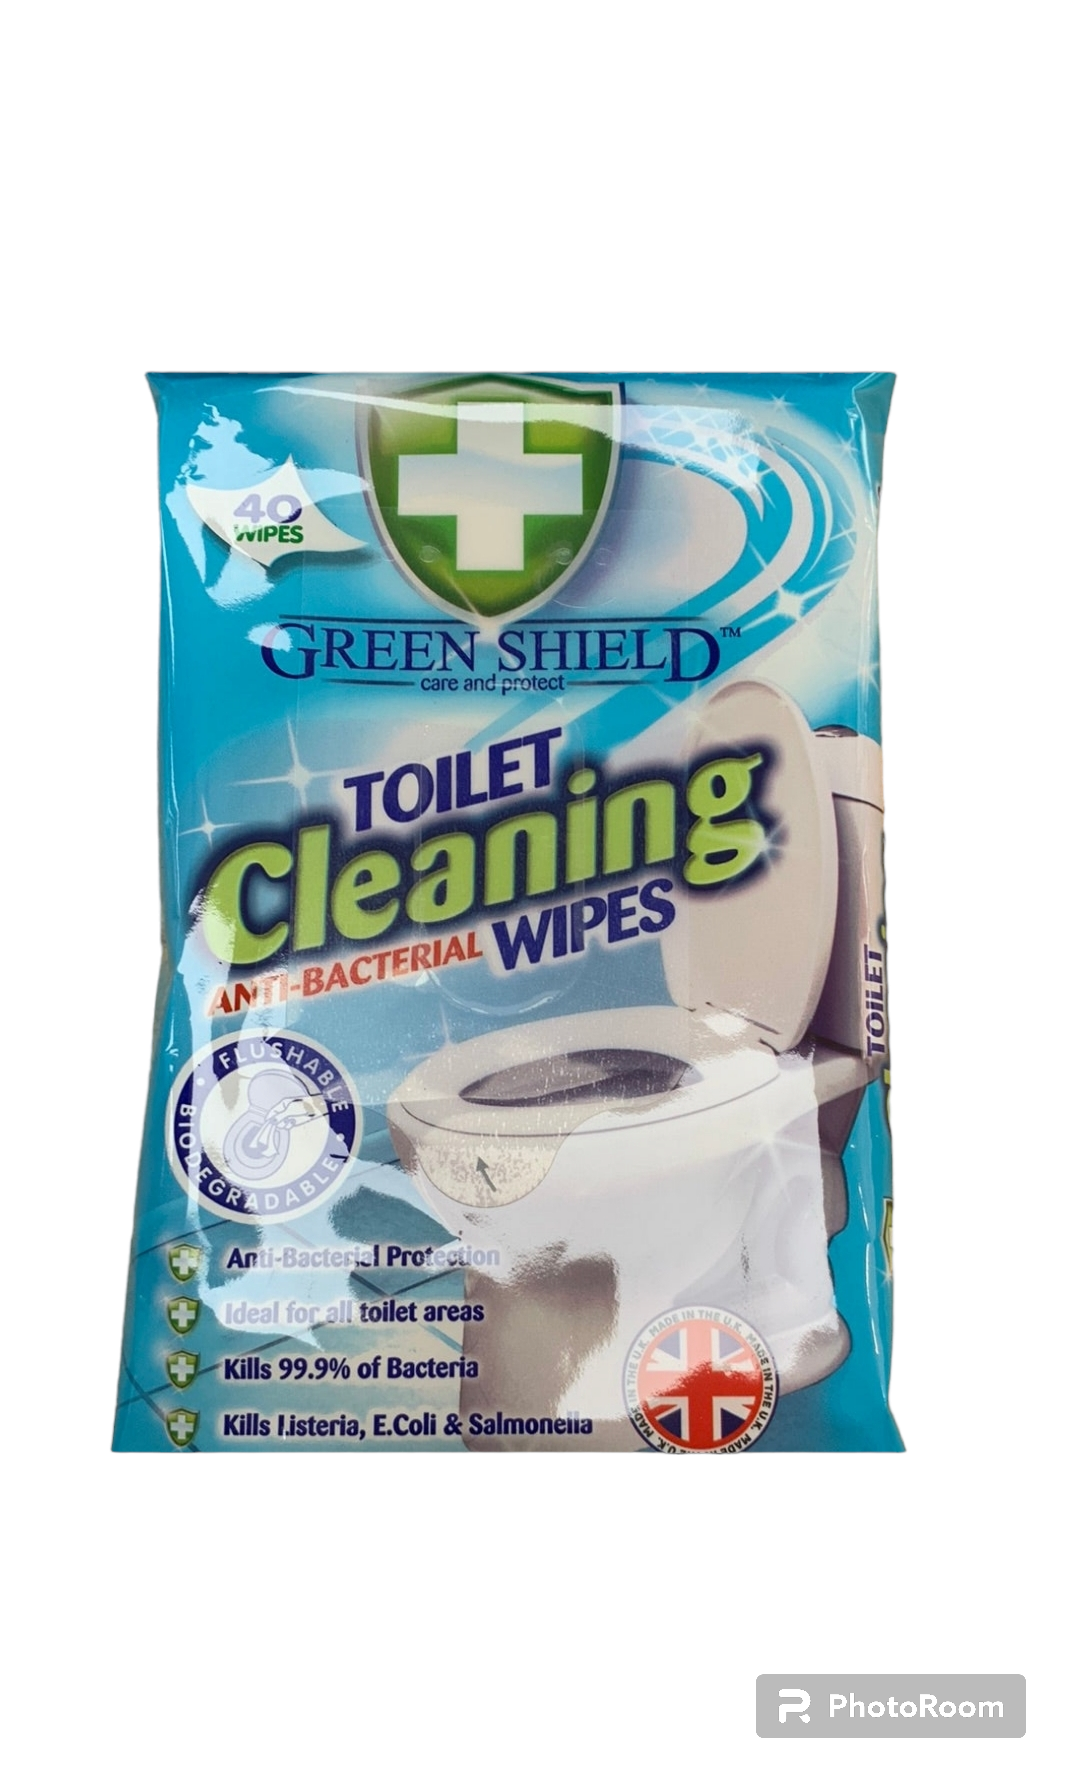 Green shield toilet cleaning wipes 40 wipes